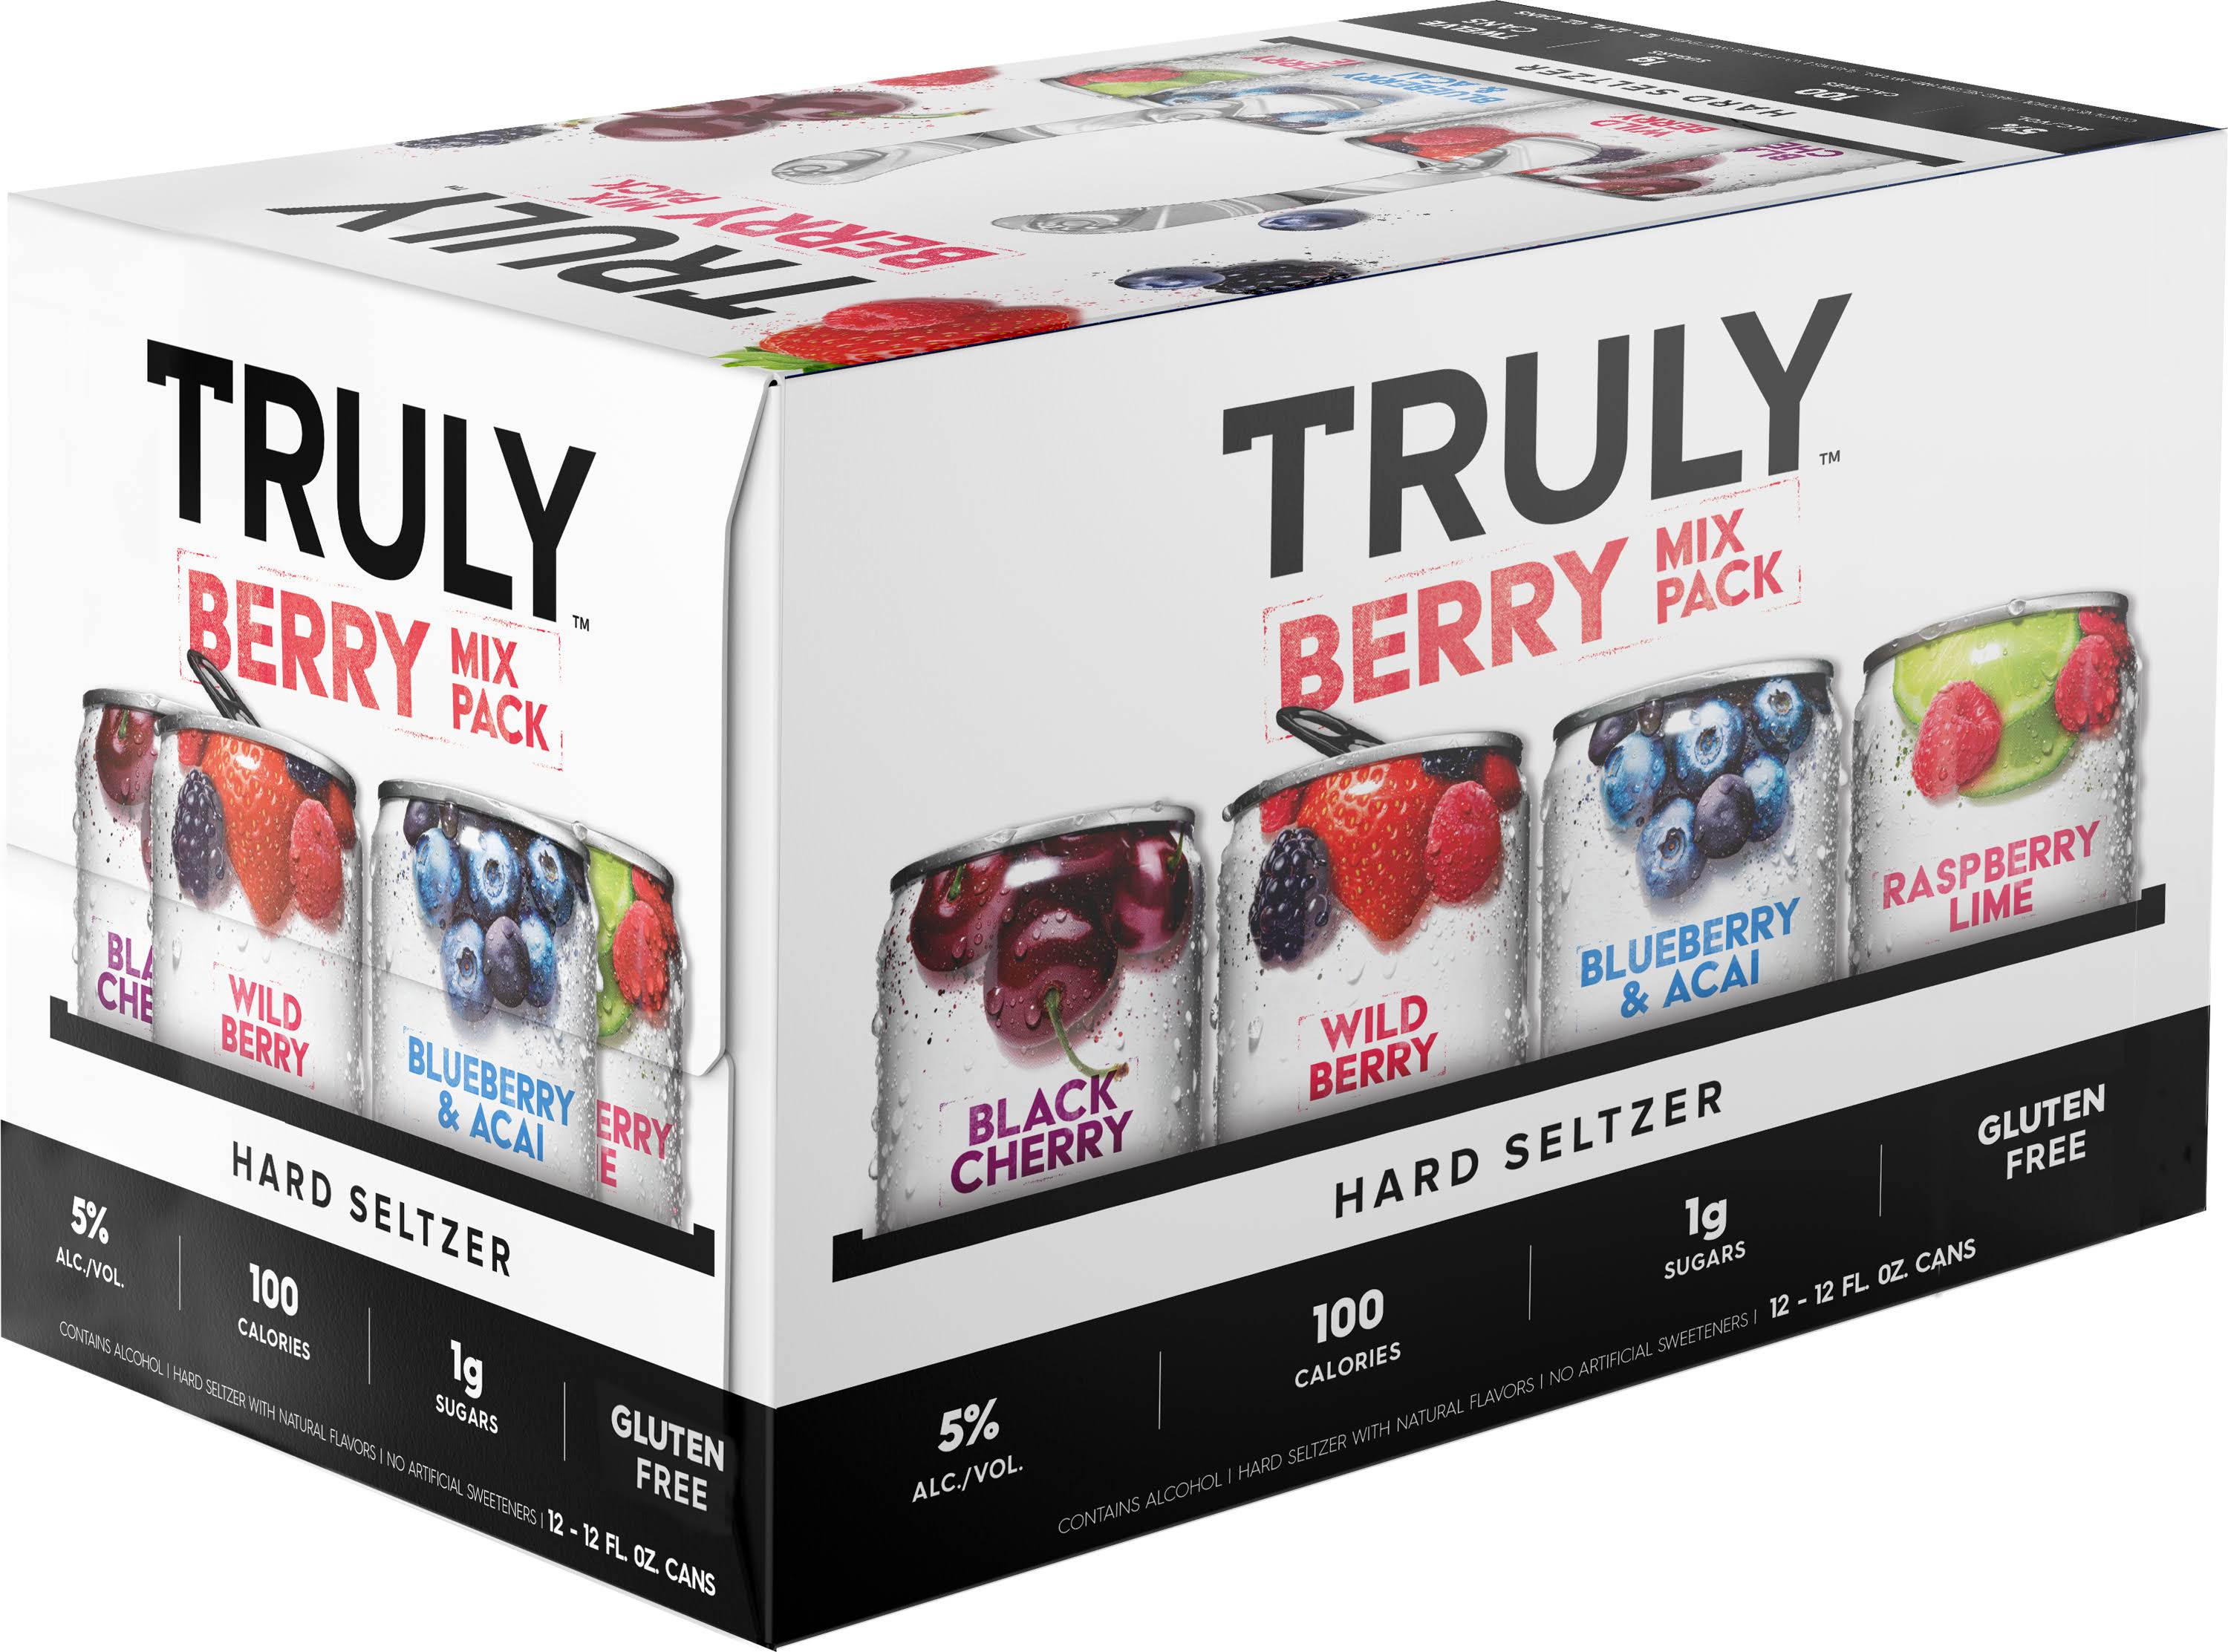 Truly Hard Seltzer, Berry Mix Pack - 12 pack, 12 fl oz cans